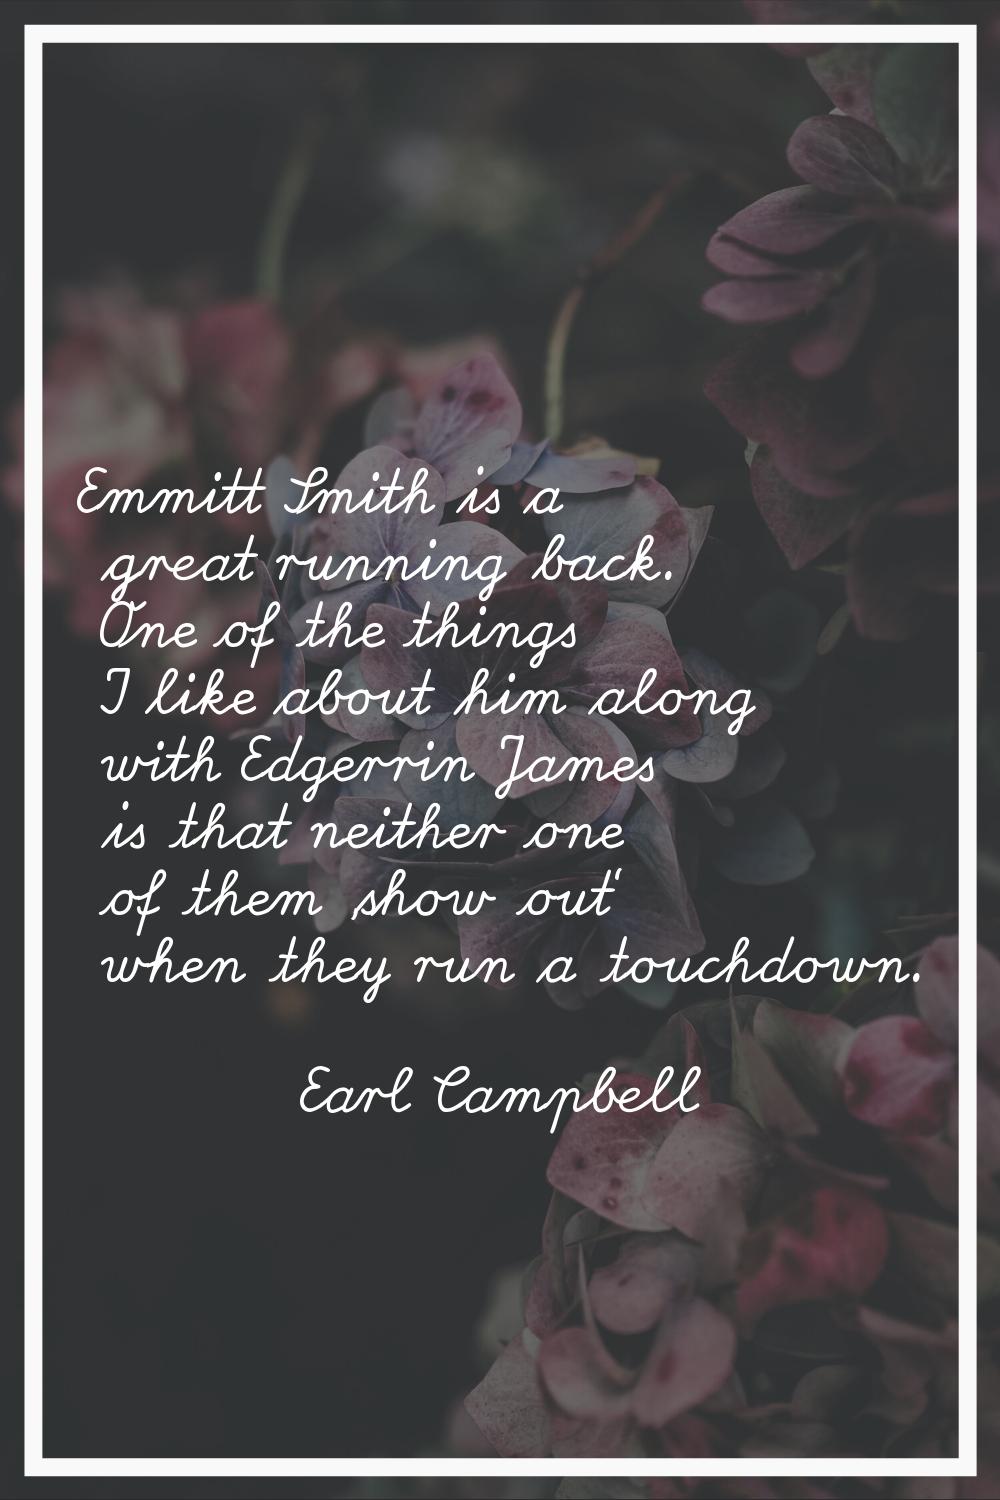 Emmitt Smith is a great running back. One of the things I like about him along with Edgerrin James 